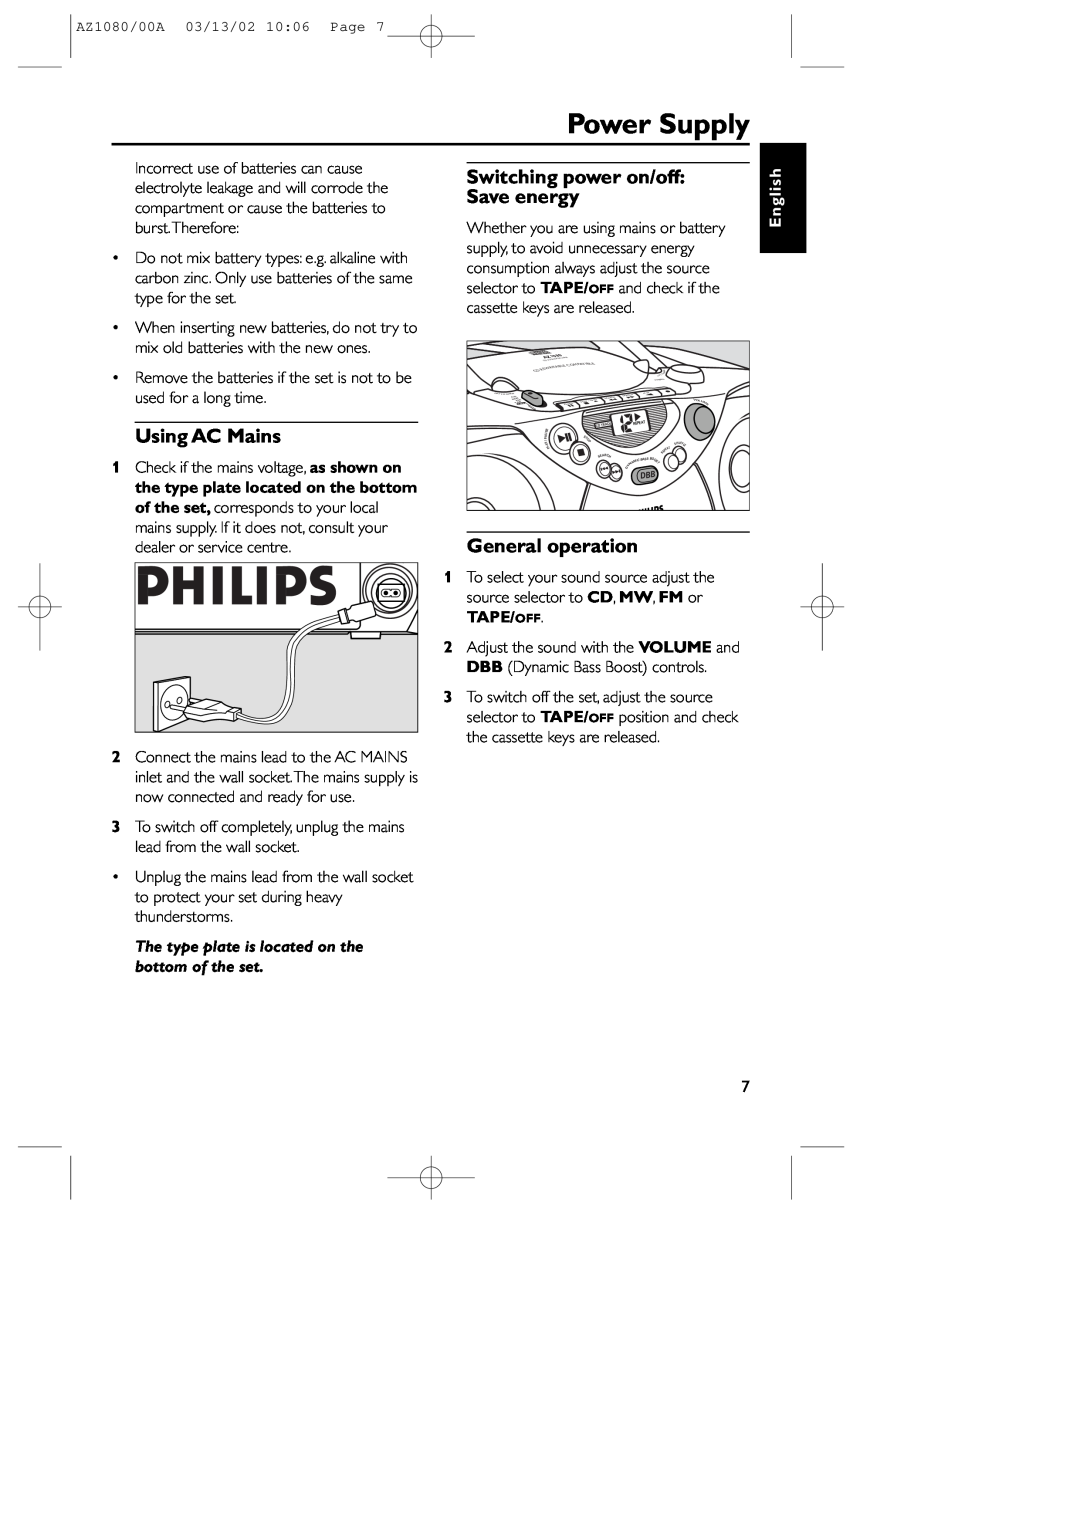 Philips AZ1081/05 manual Power Supply, Using AC Mains, Switching power on/off Save energy, General operation, English 